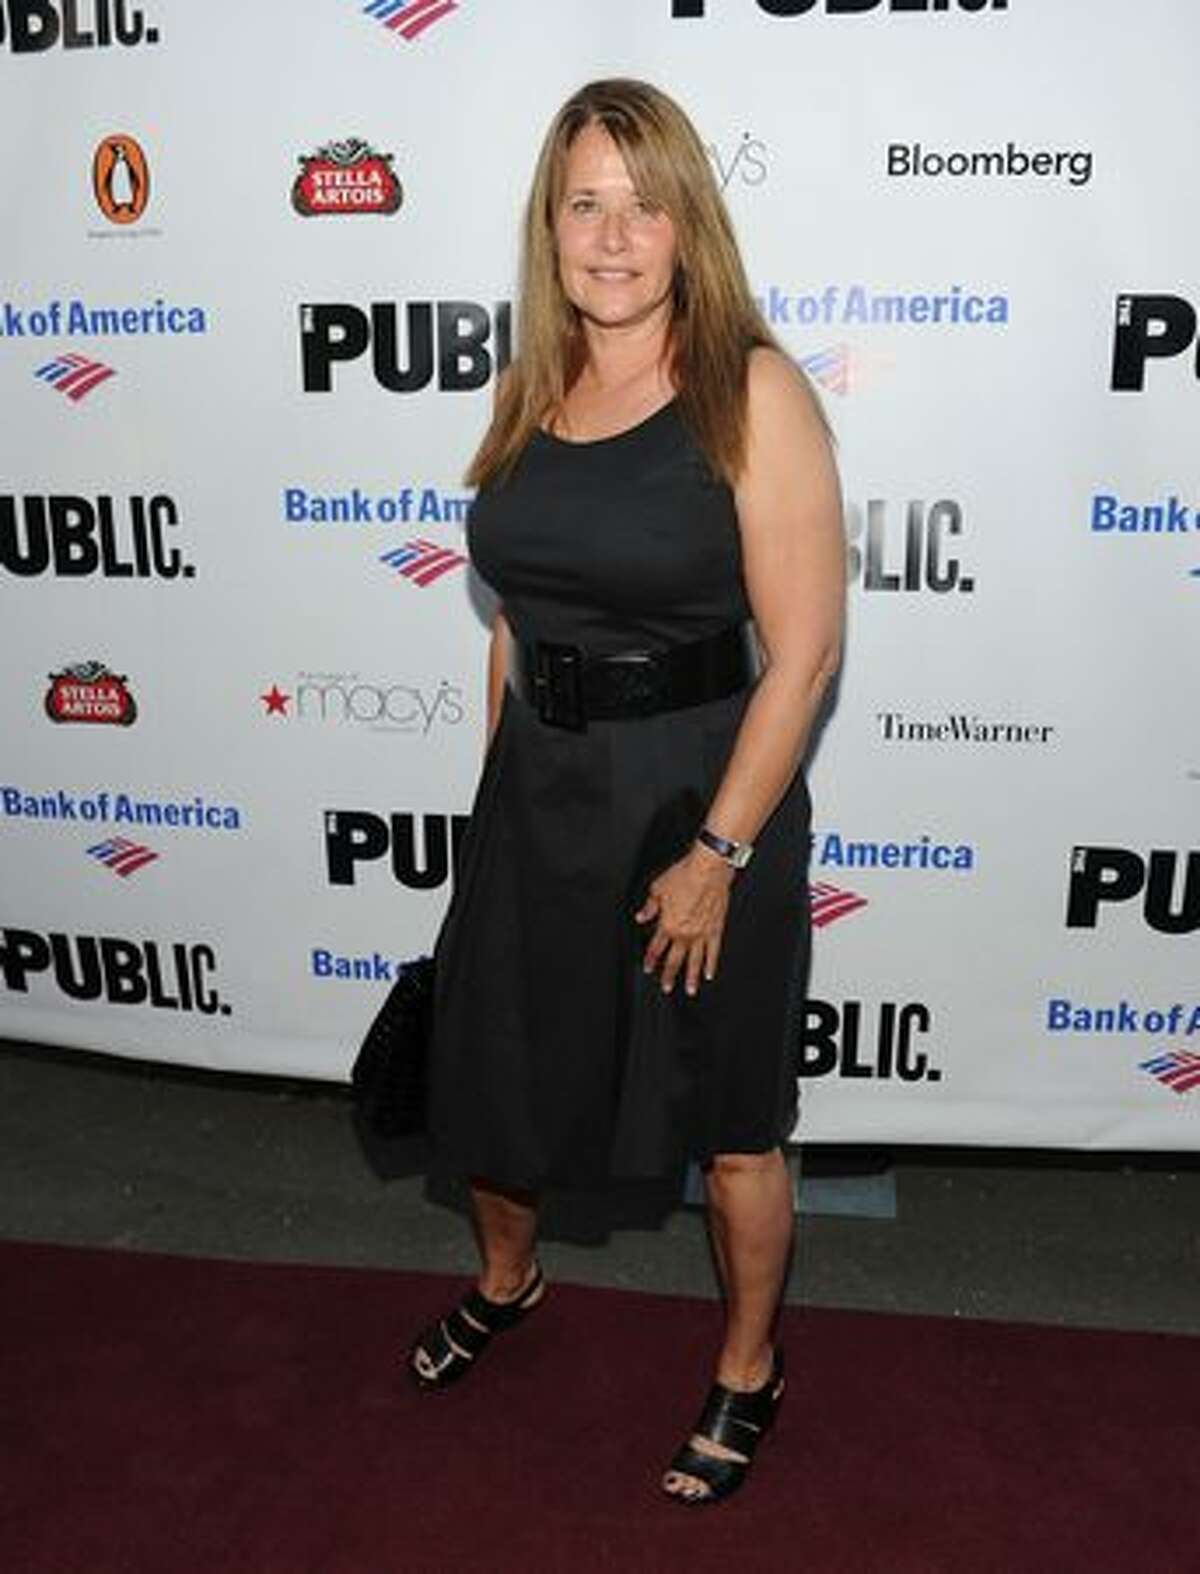 Actress Lorraine Bracco attends the 2010 Public Theater Gala at the Delacorte Theater.